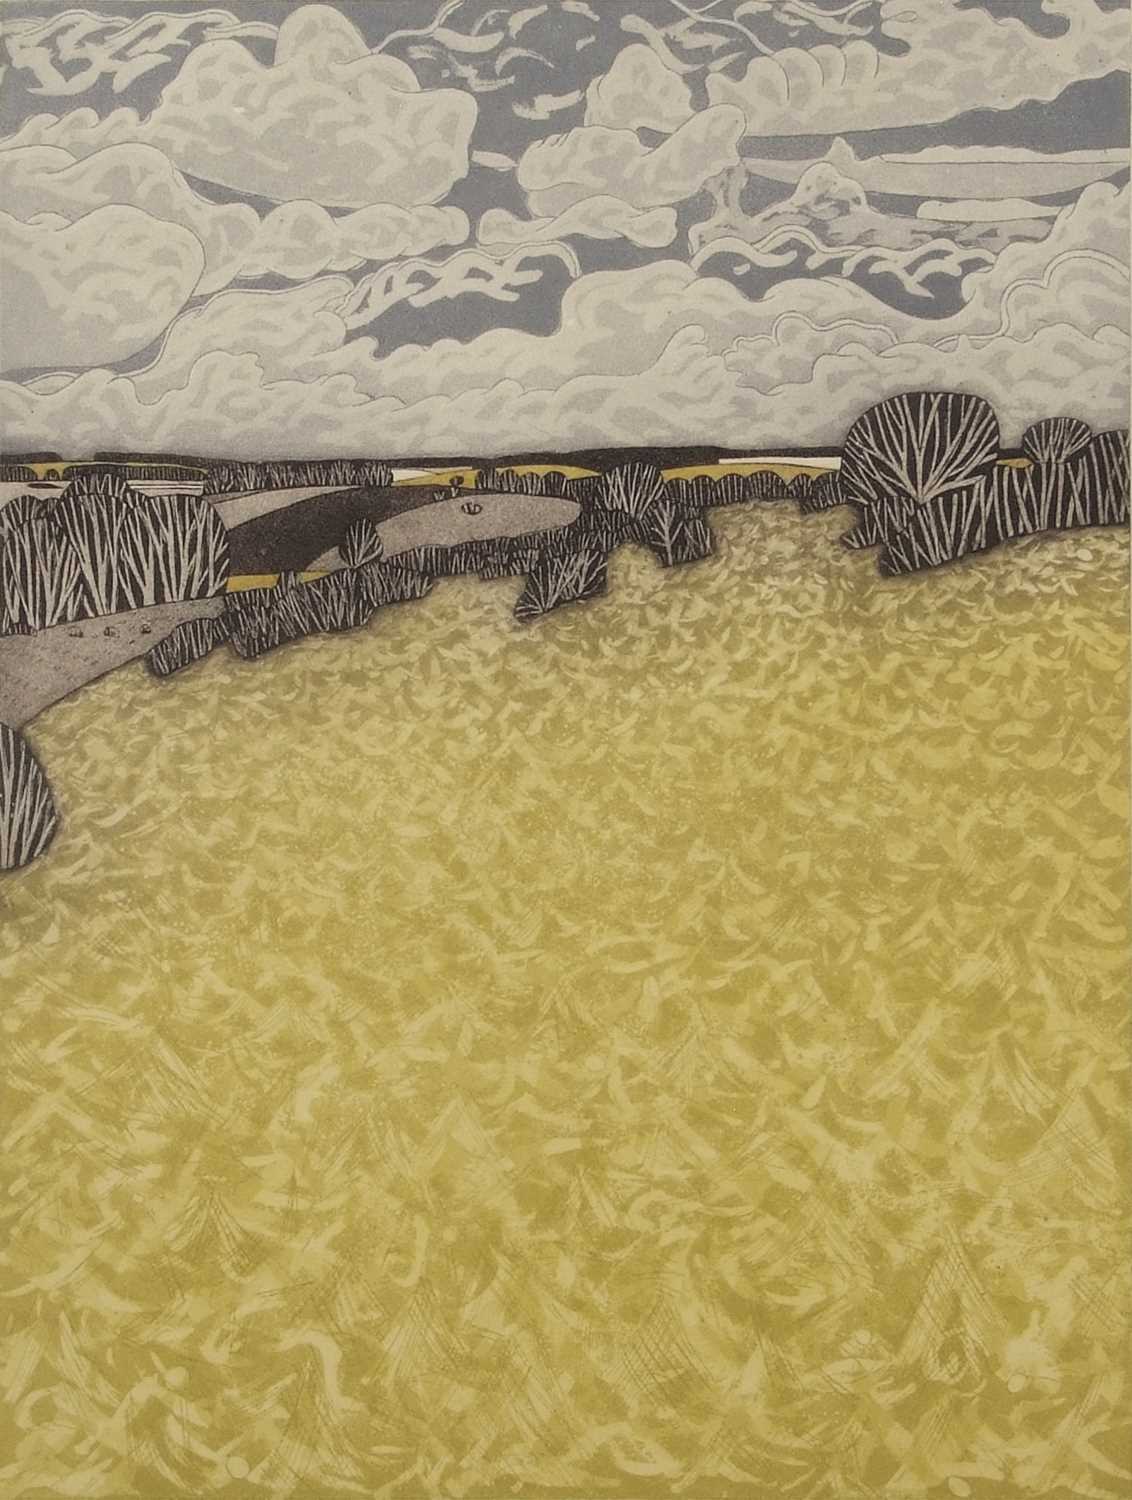 John Brunsdon (British, 1933-2014), 'Tangled Grasses', colour etching, signed and titled in pencil